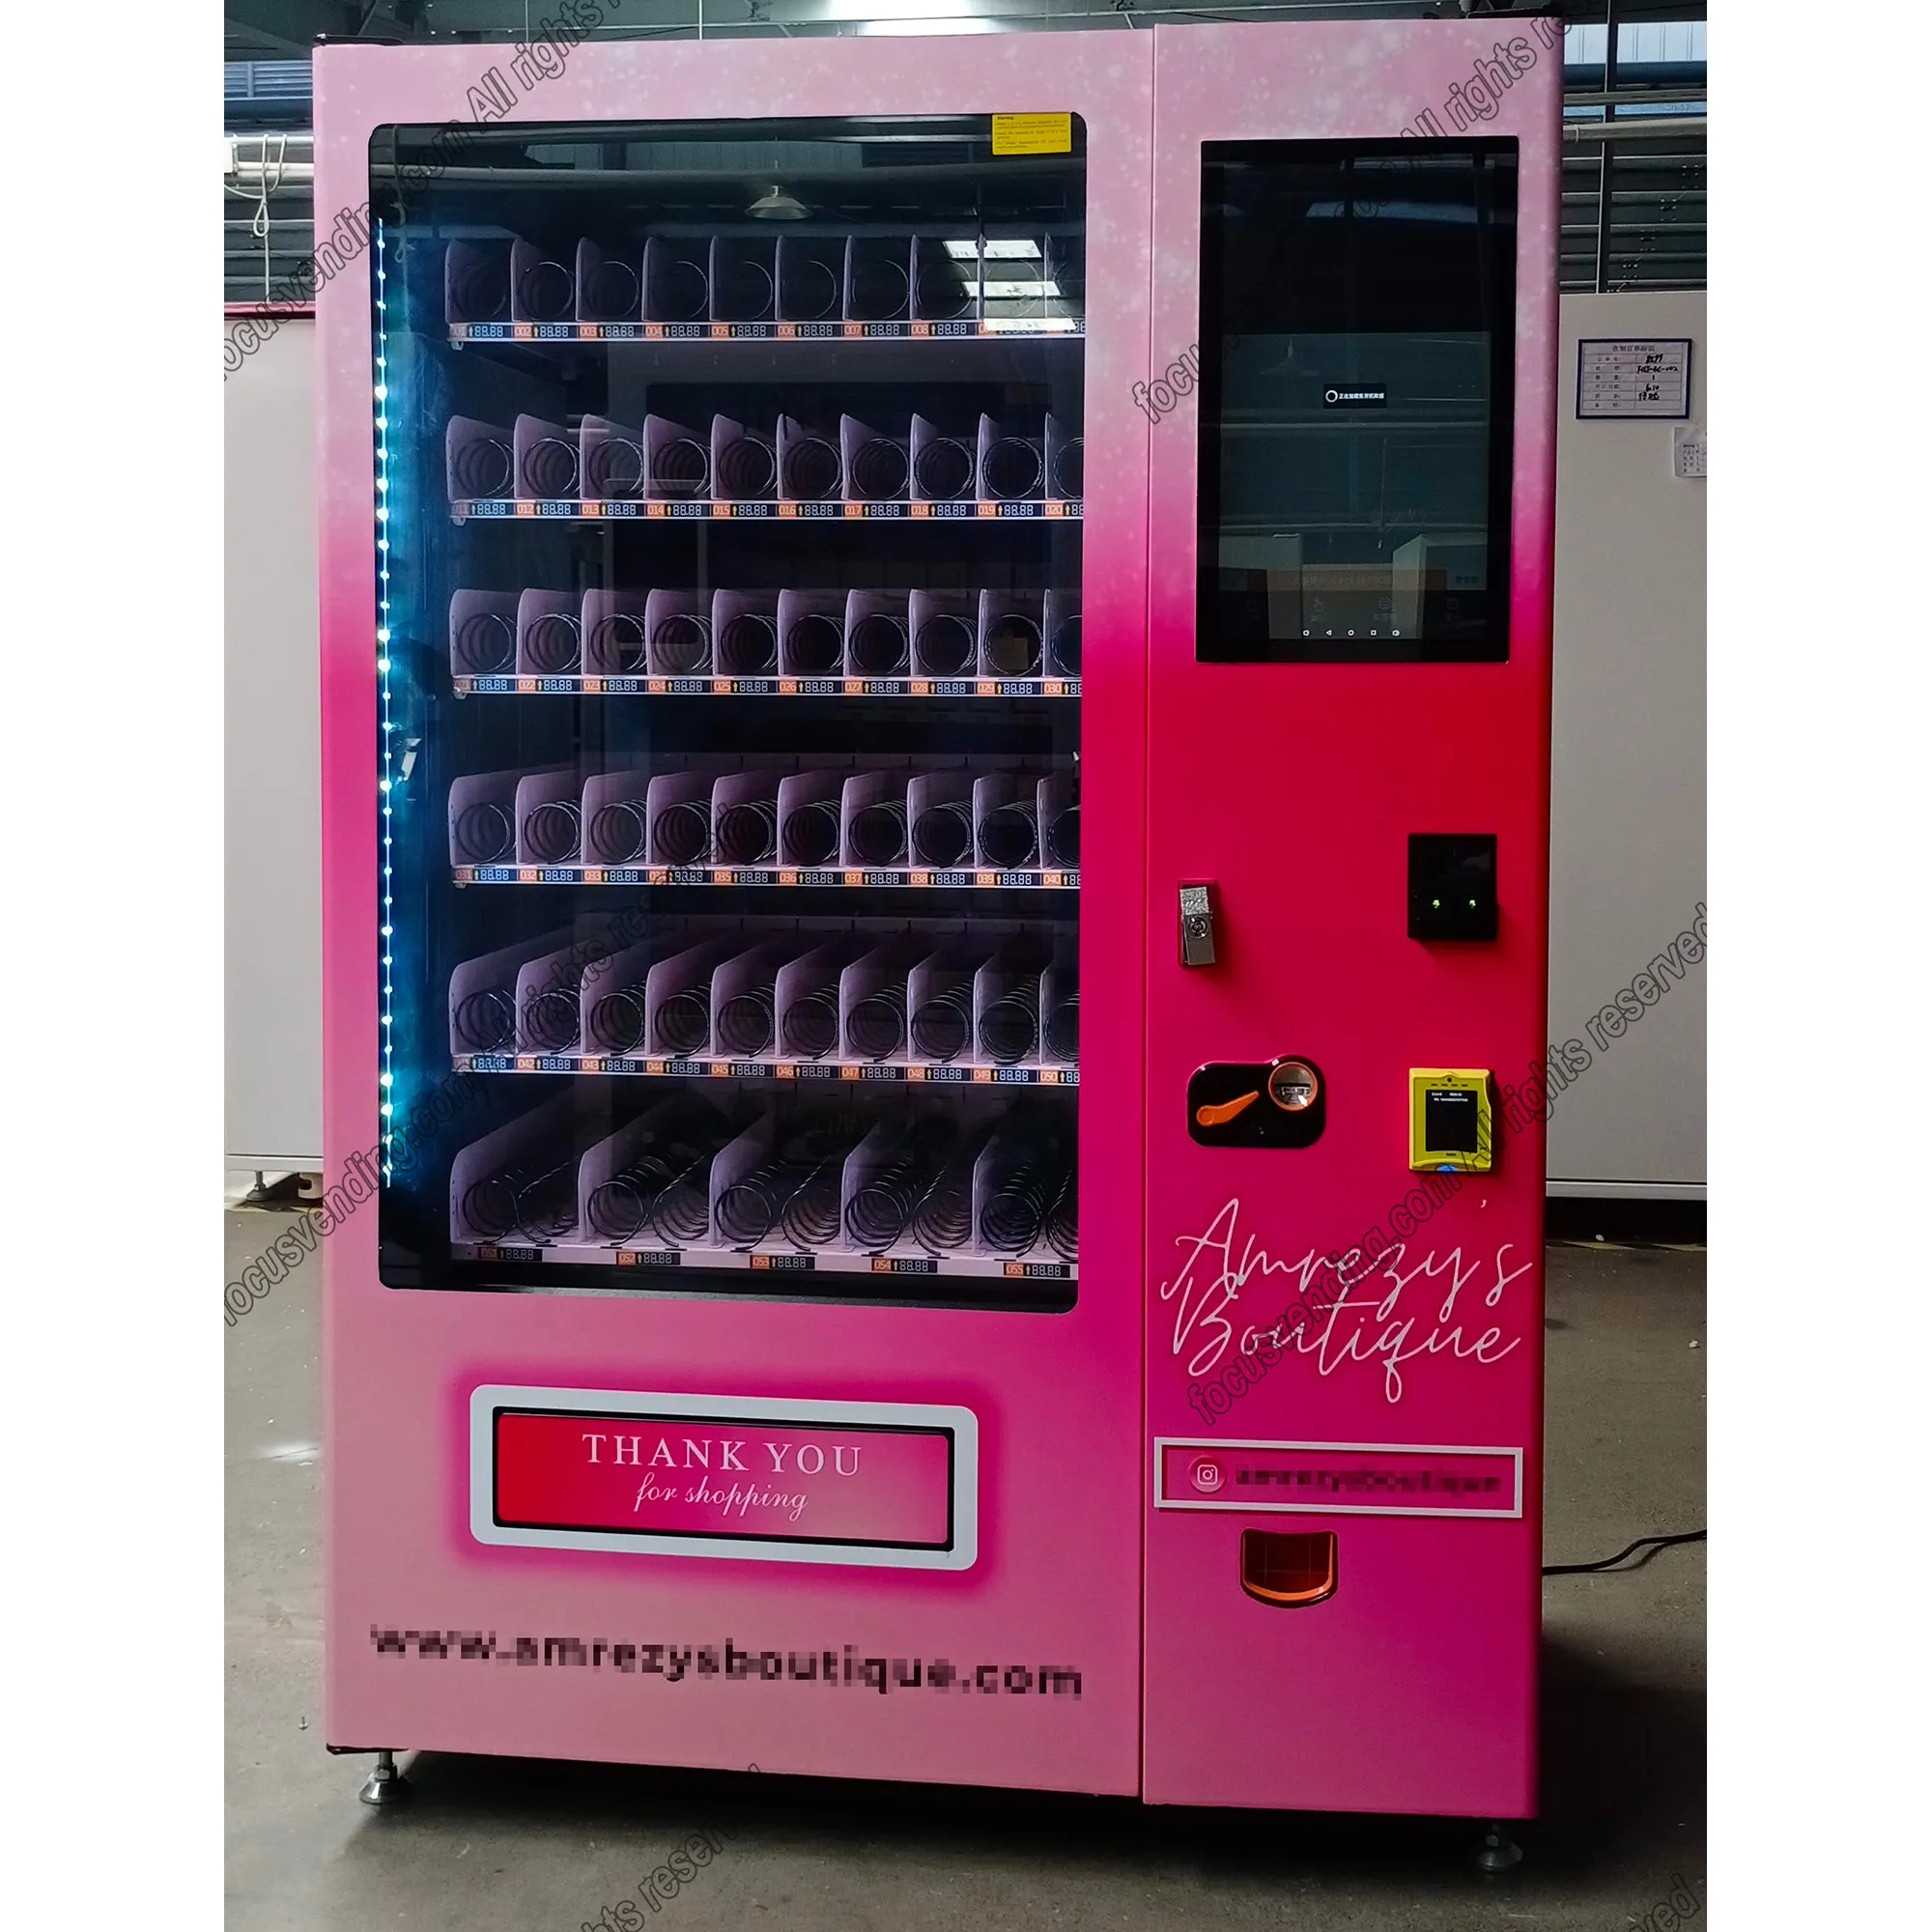 unmanned vending machine which is temperature controlled vending machine and automatic machine vending